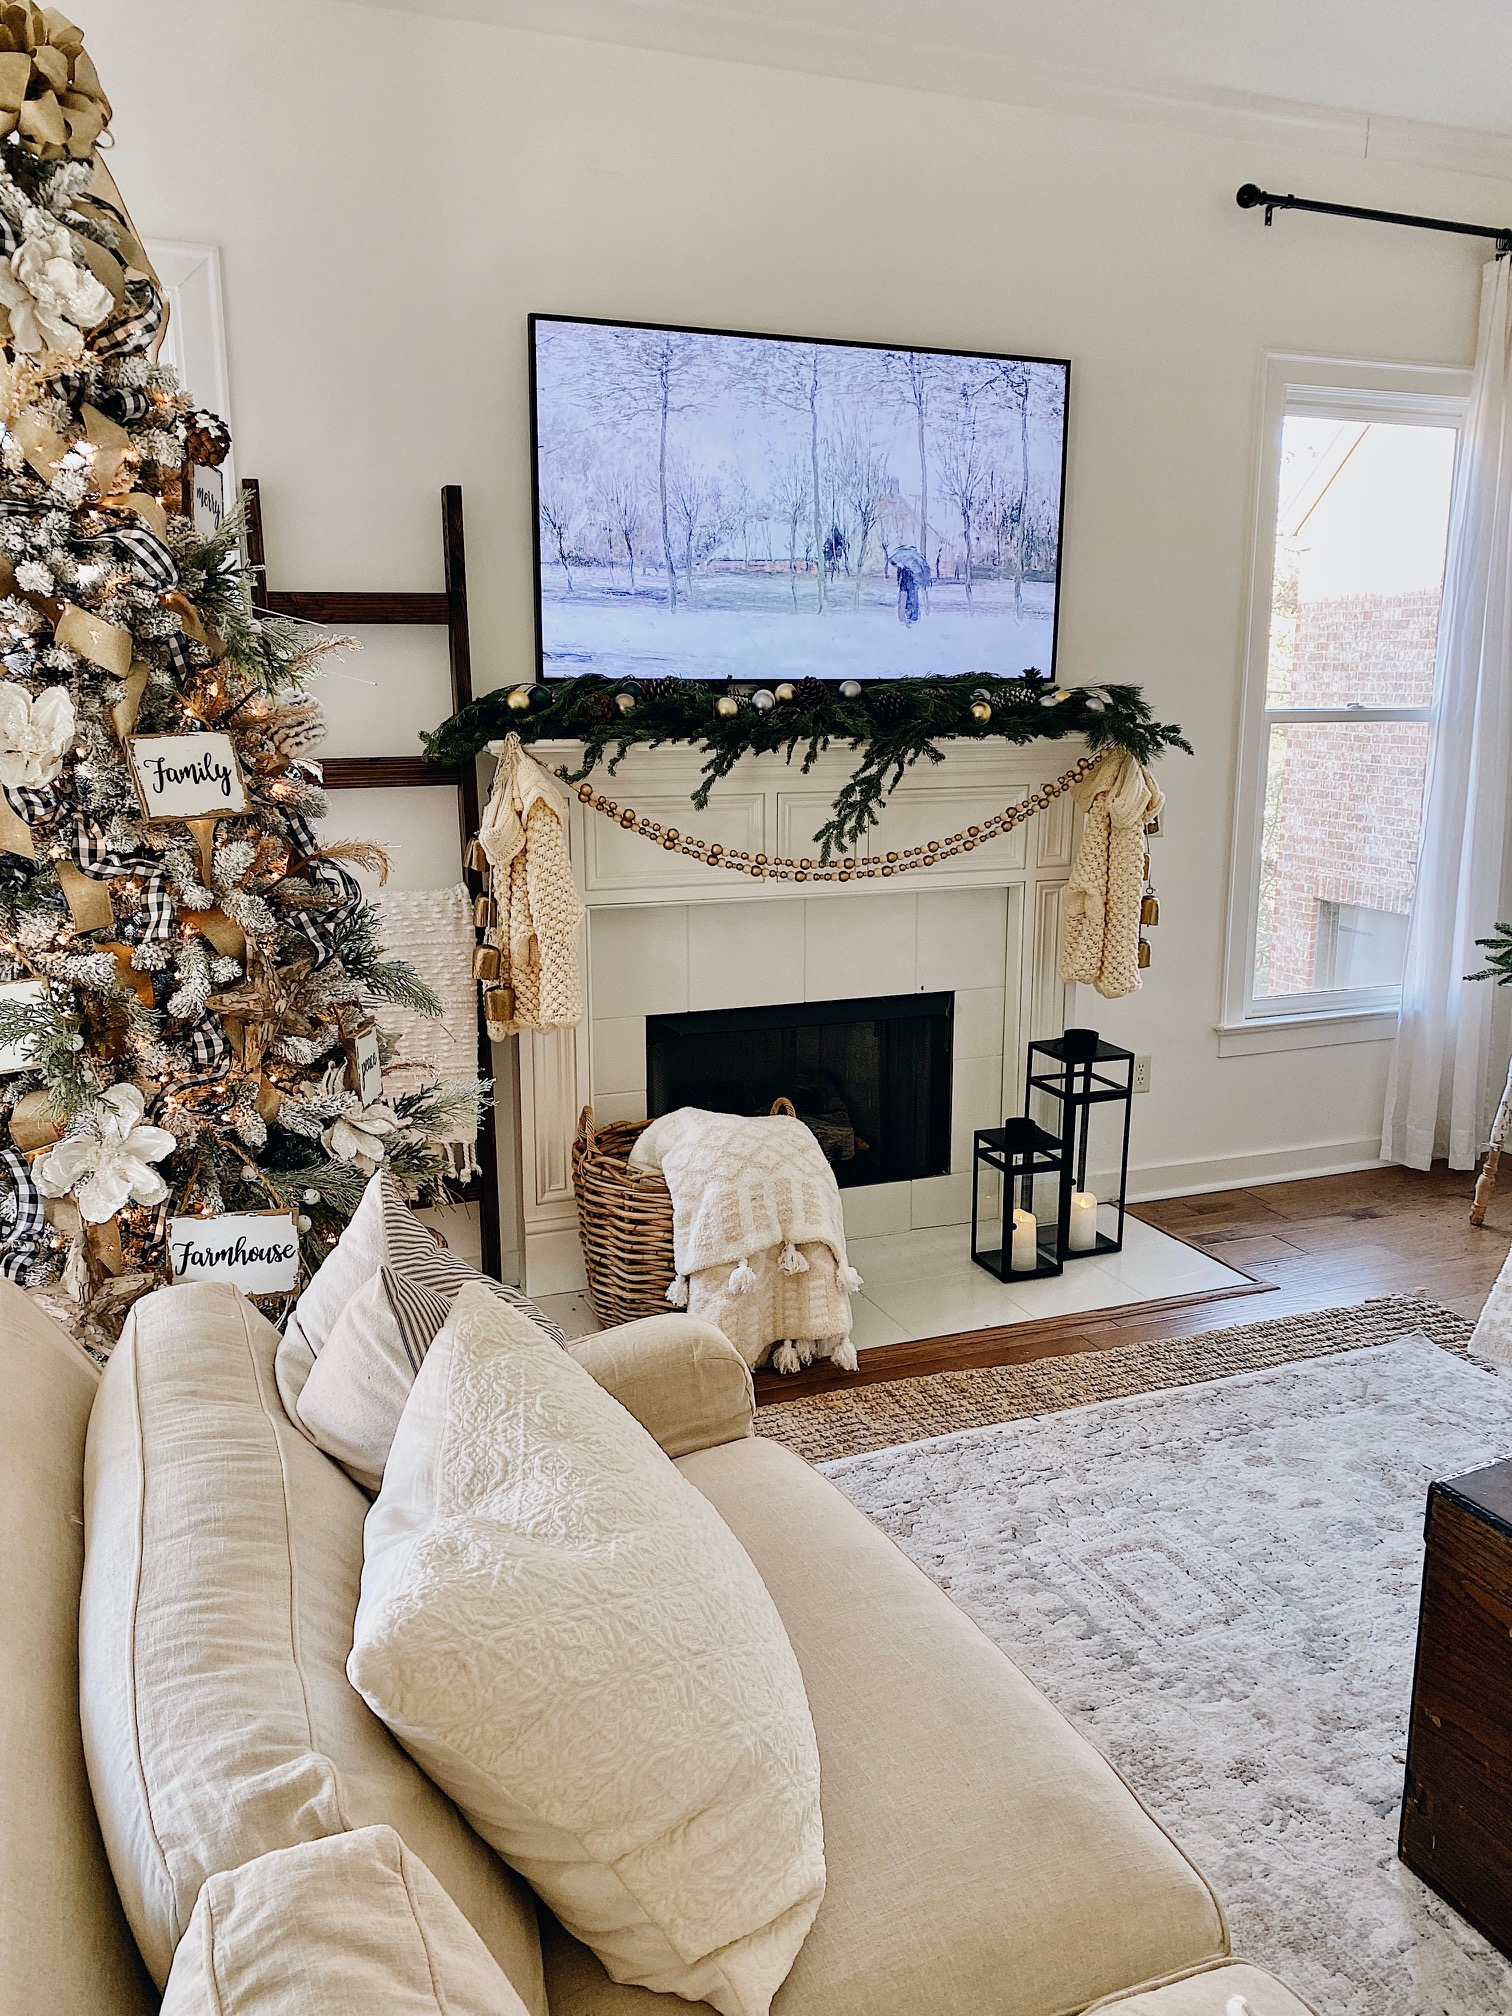 Holiday Home Tour 2021 by top AL home decor blogger, She Gave It A Go